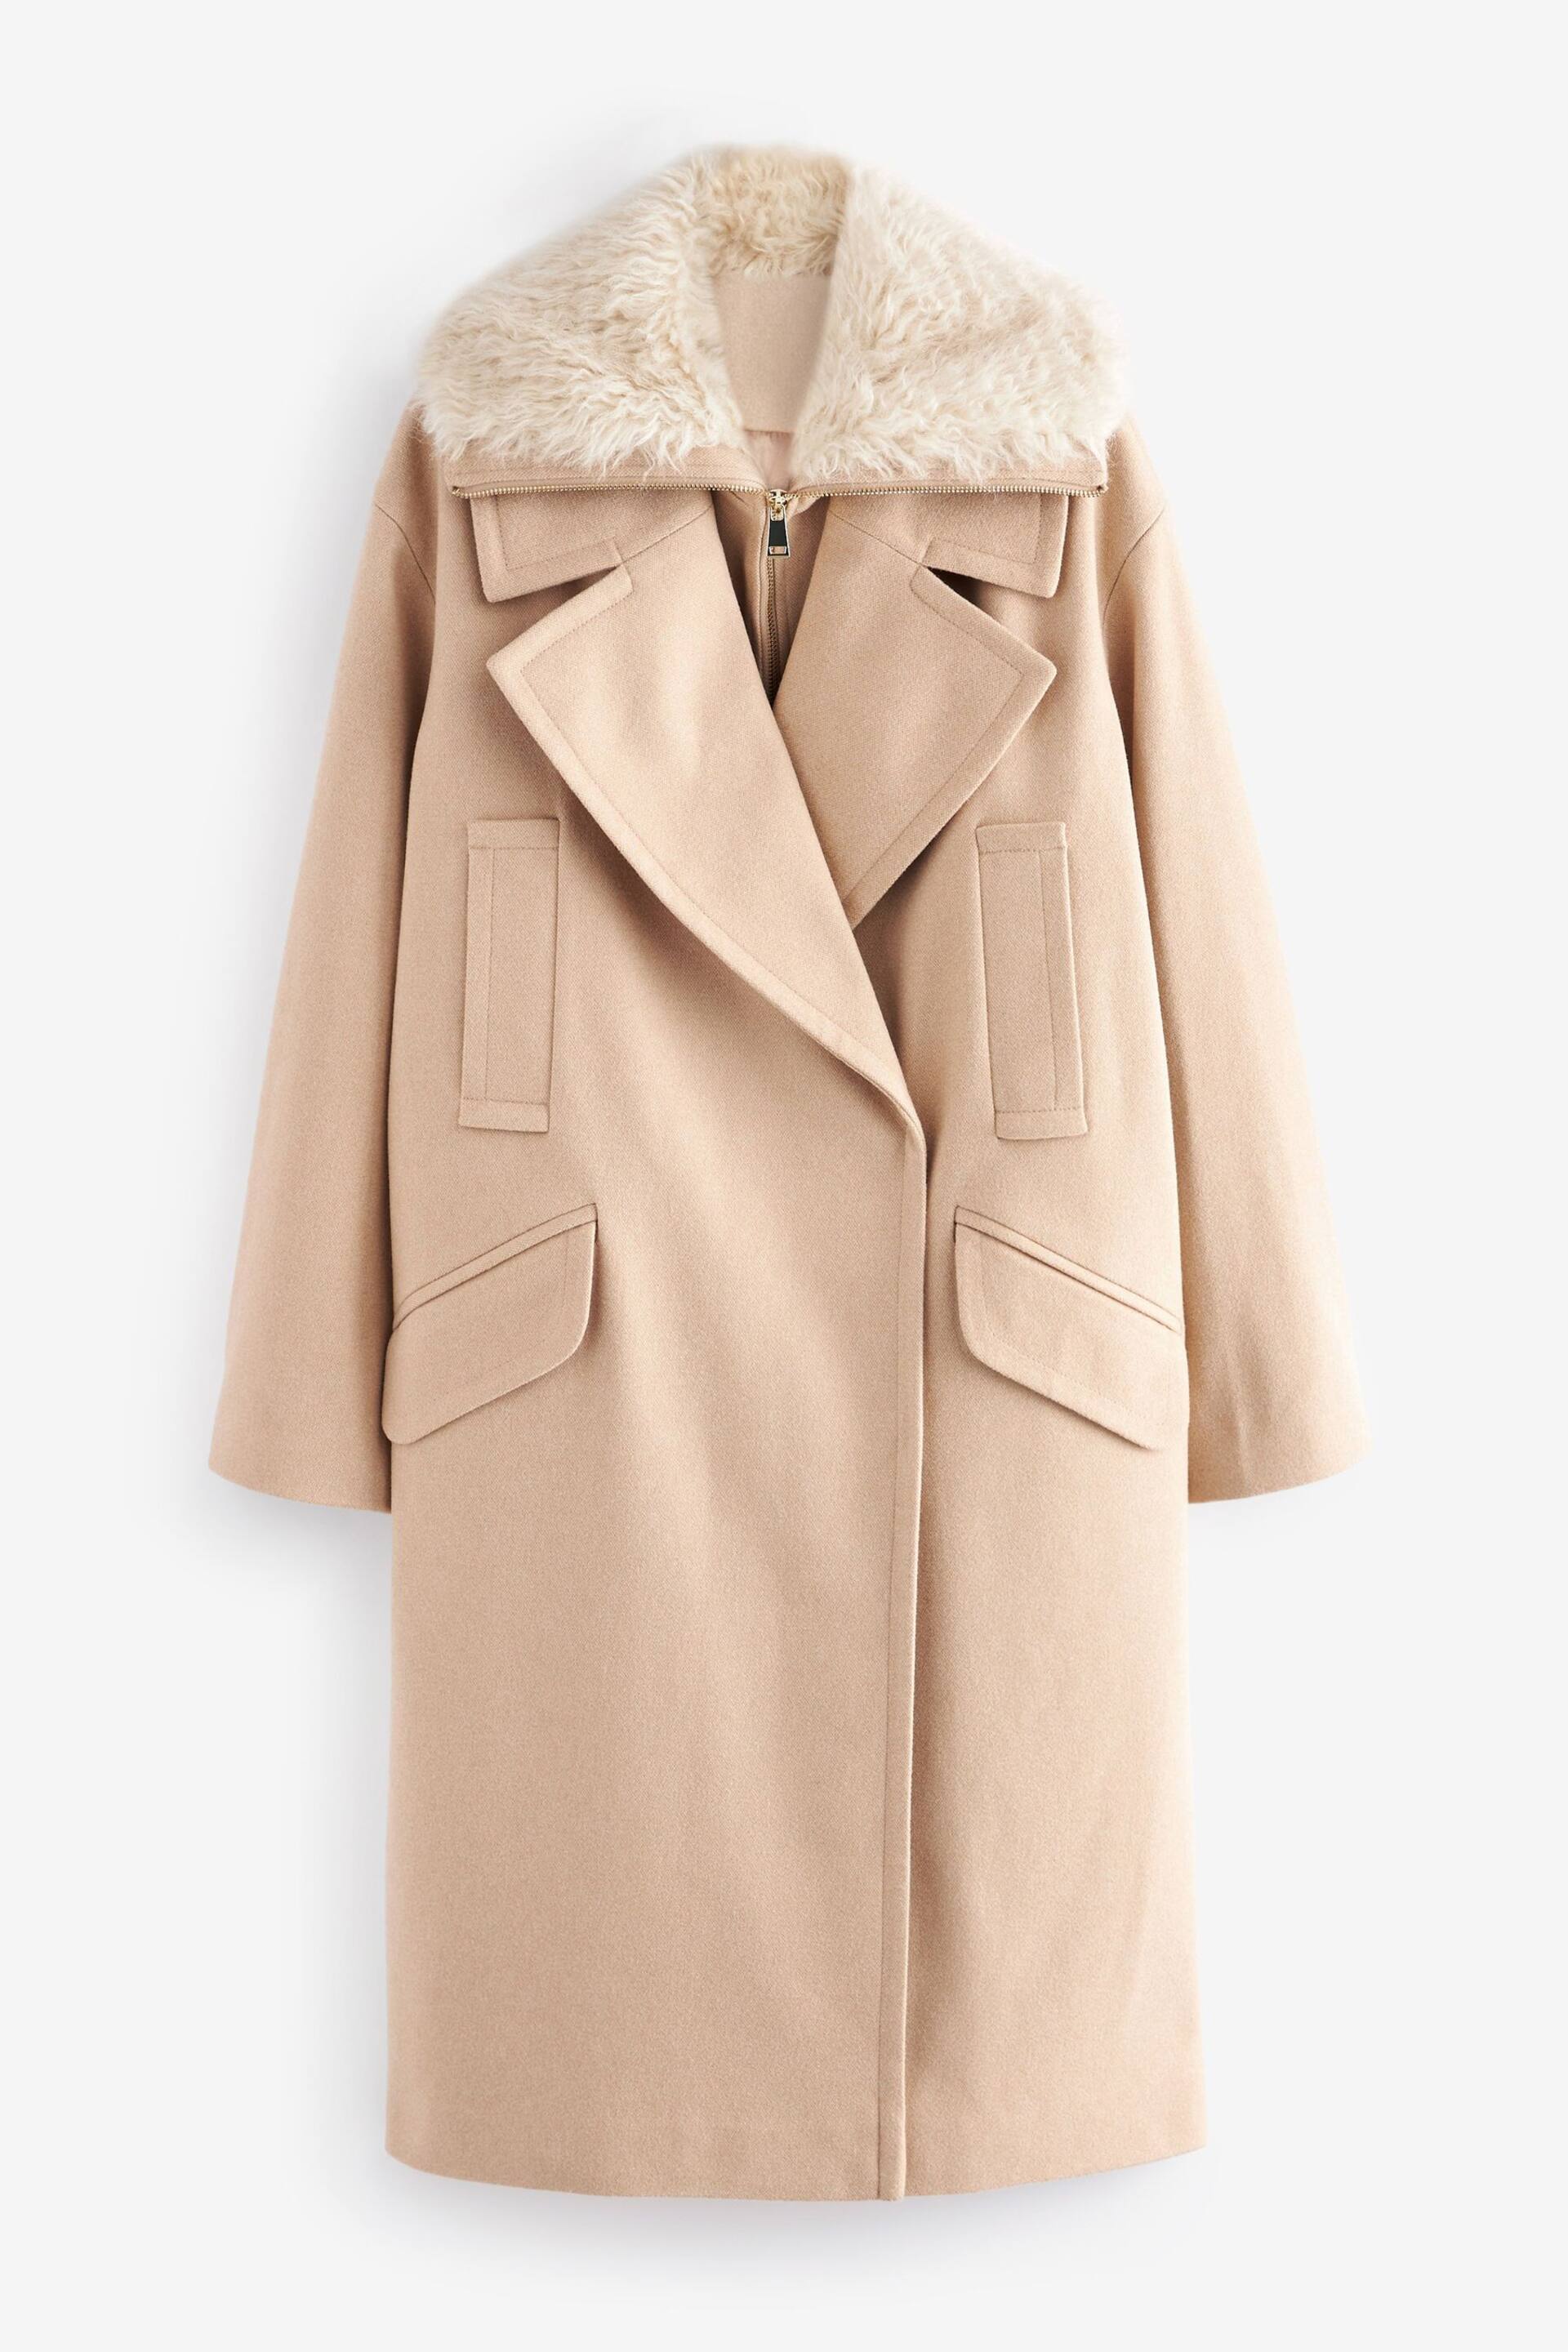 Neutral Mid-Length Coat with Detachable Faux Fur Collar - Image 8 of 12